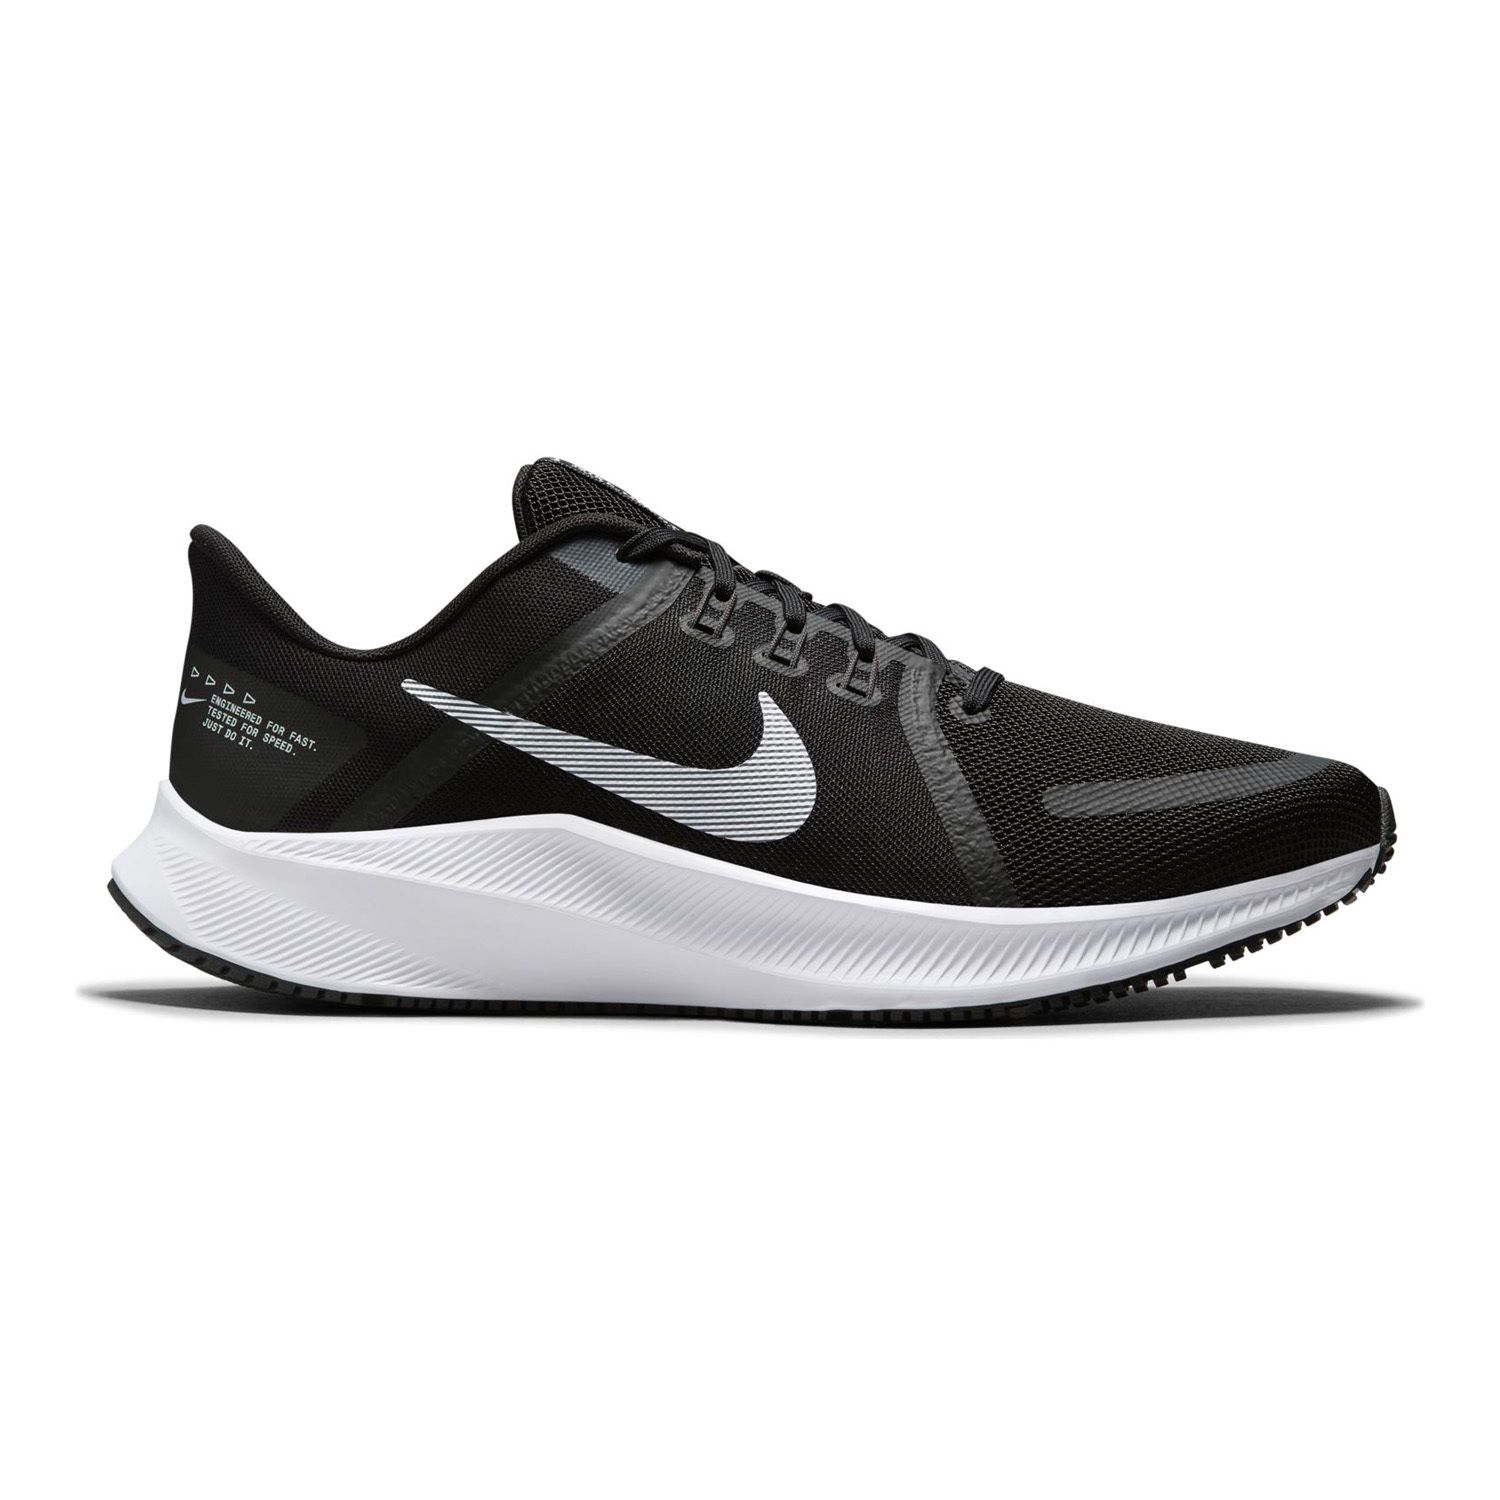 nike quest 4 men's running shoes stores